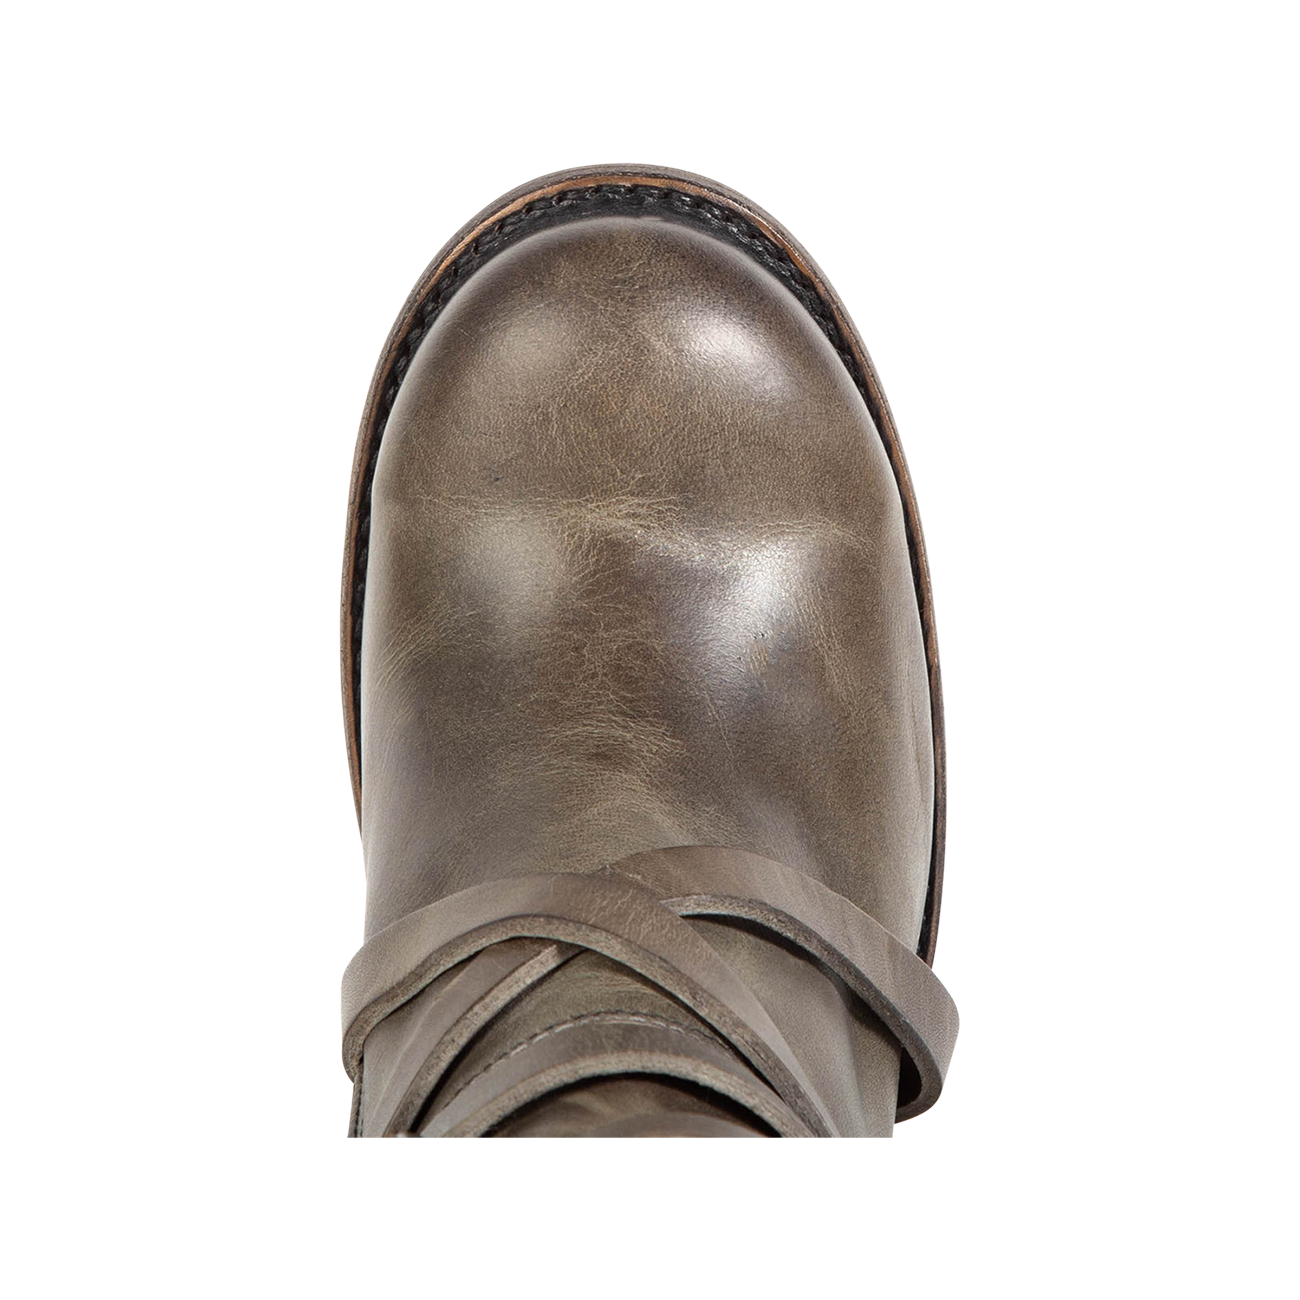 Top view showing round toe and leather ankle straps on FREEBIRD women's Baker stone boot